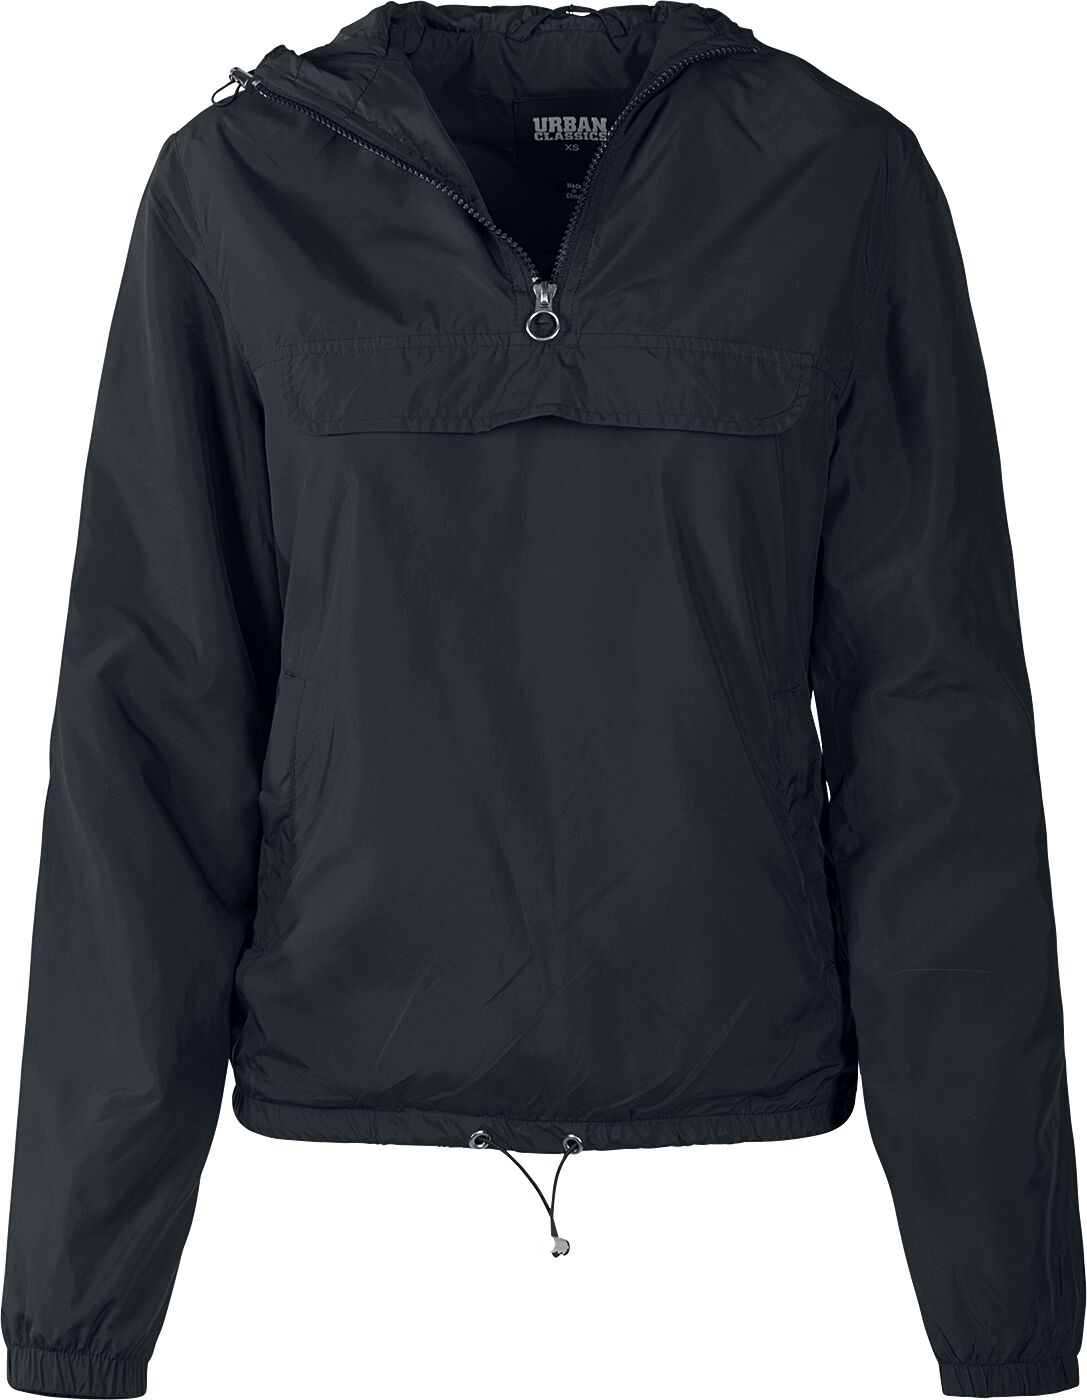 Image of Giacca a vento di Urban Classics - Ladies Basic Windrunner - XS a 5XL - Donna - nero